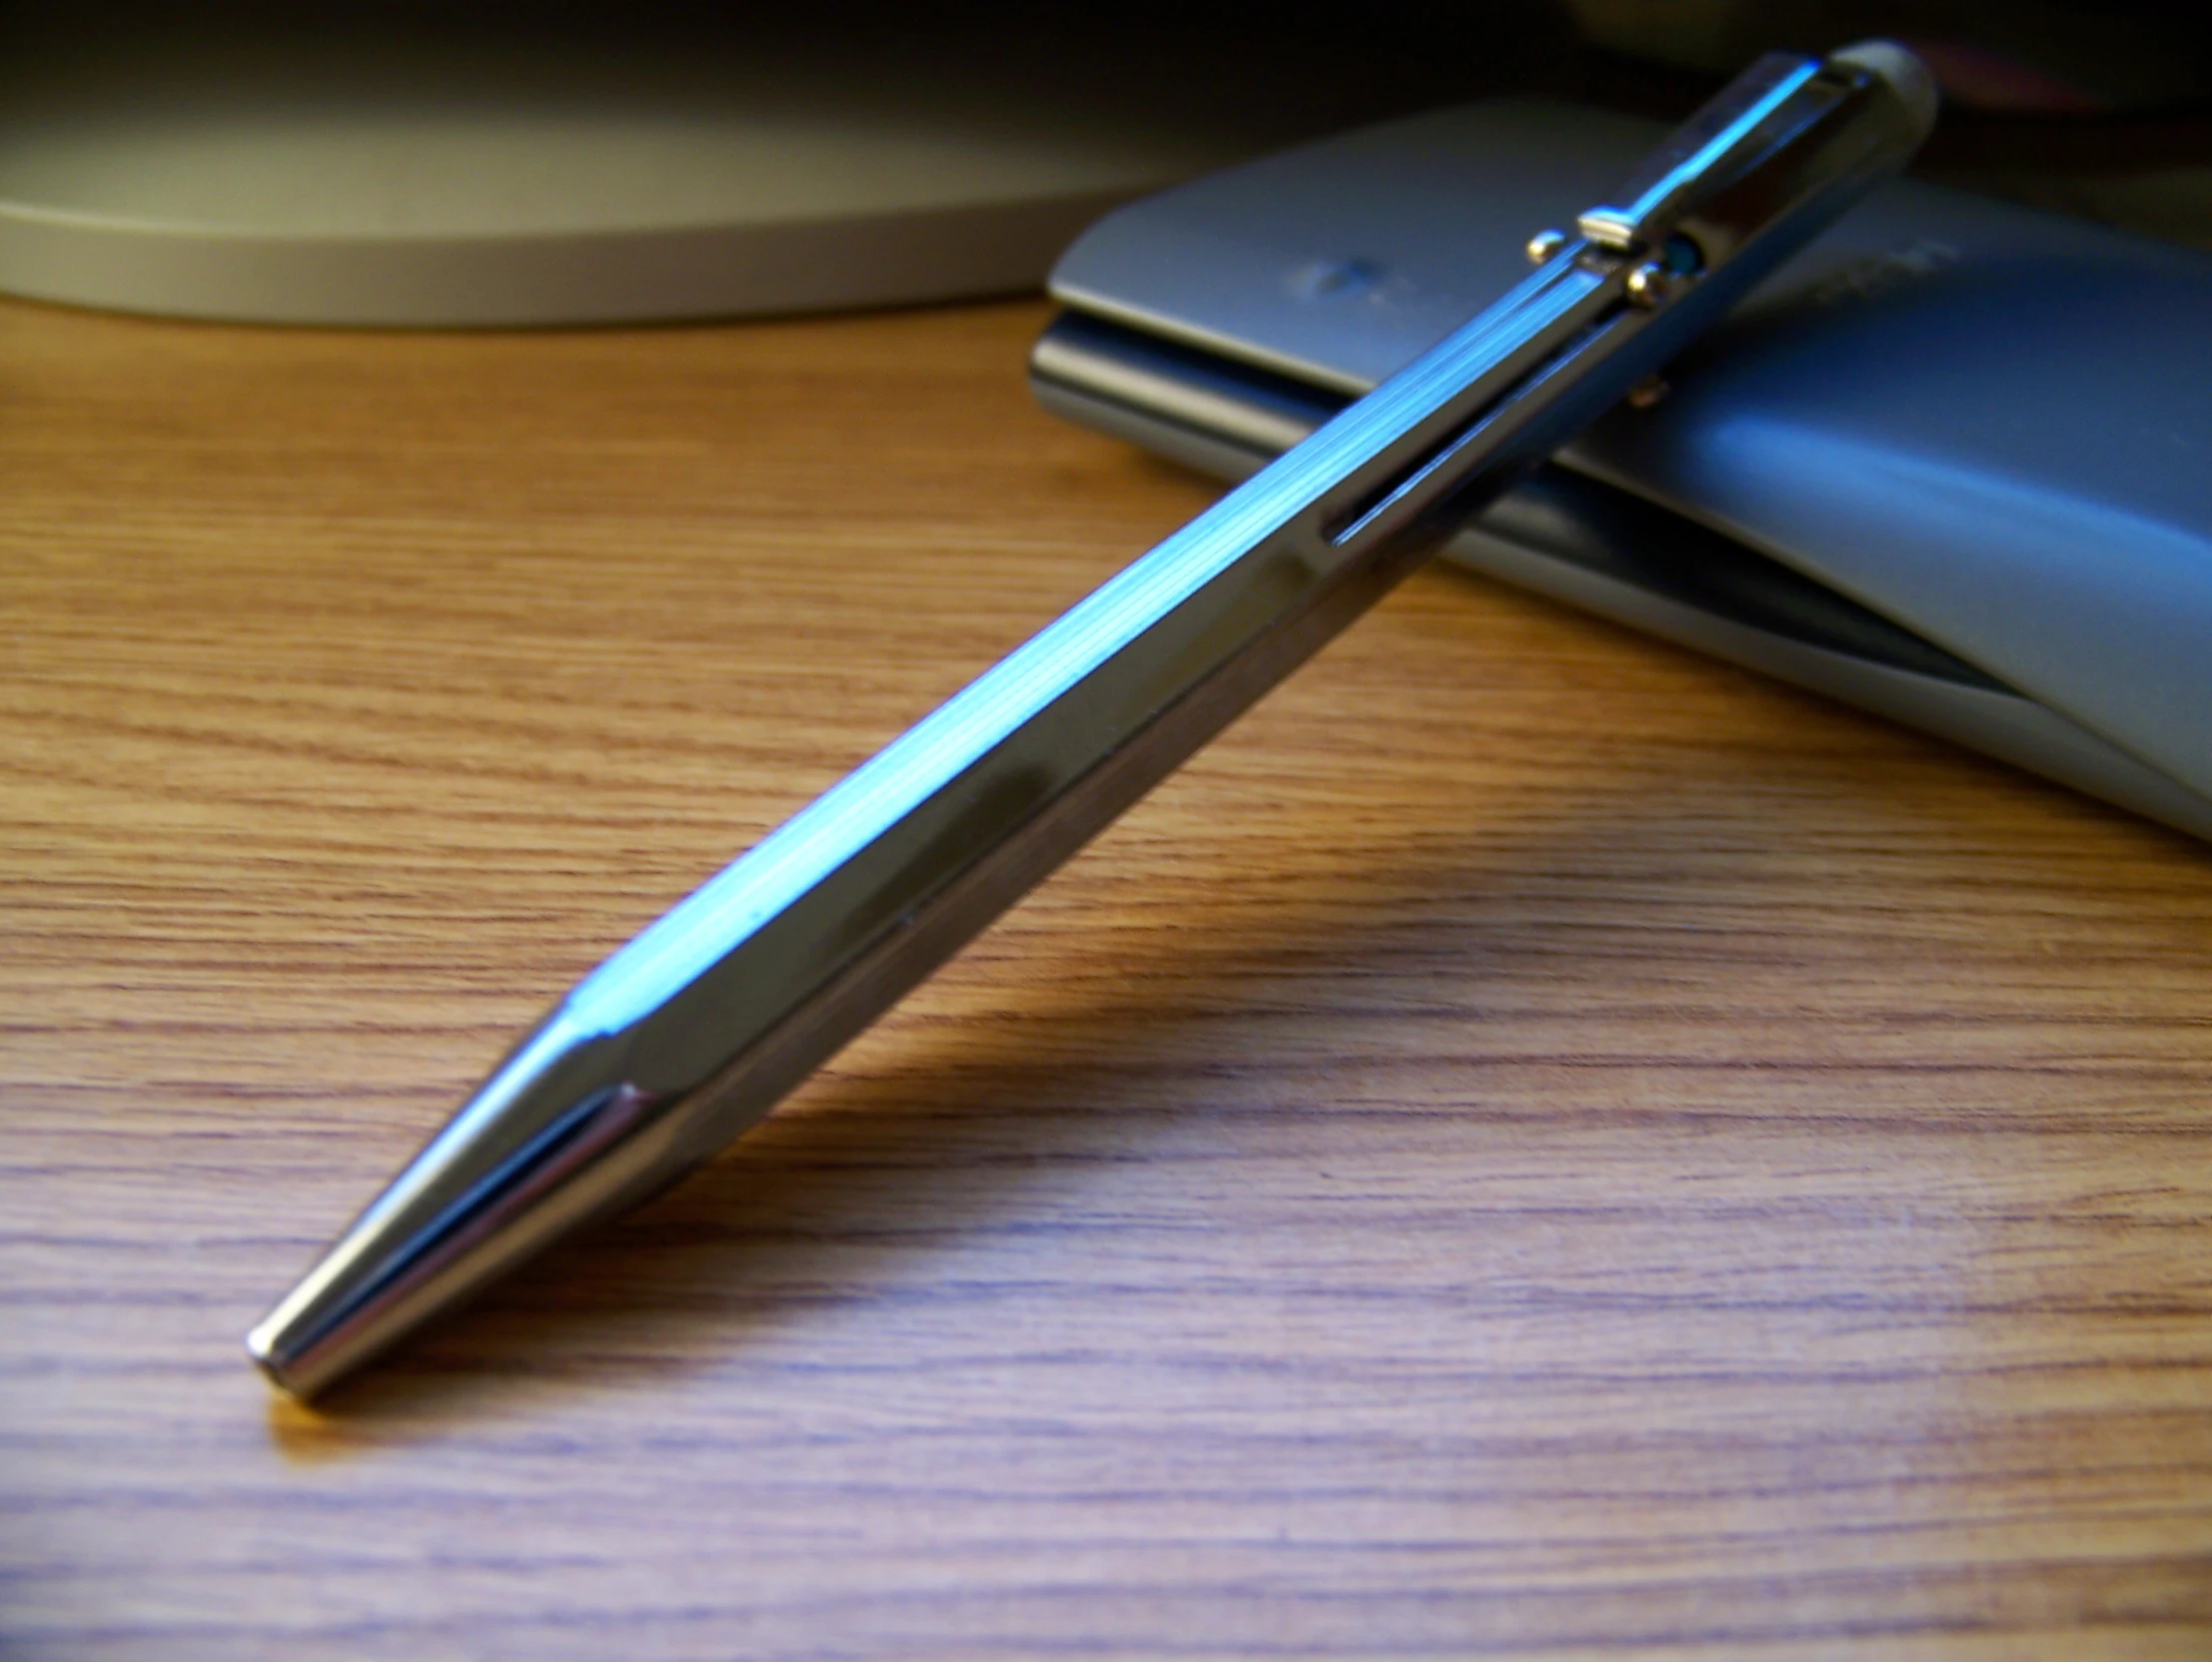 a pen is laying on the table next to a laptop